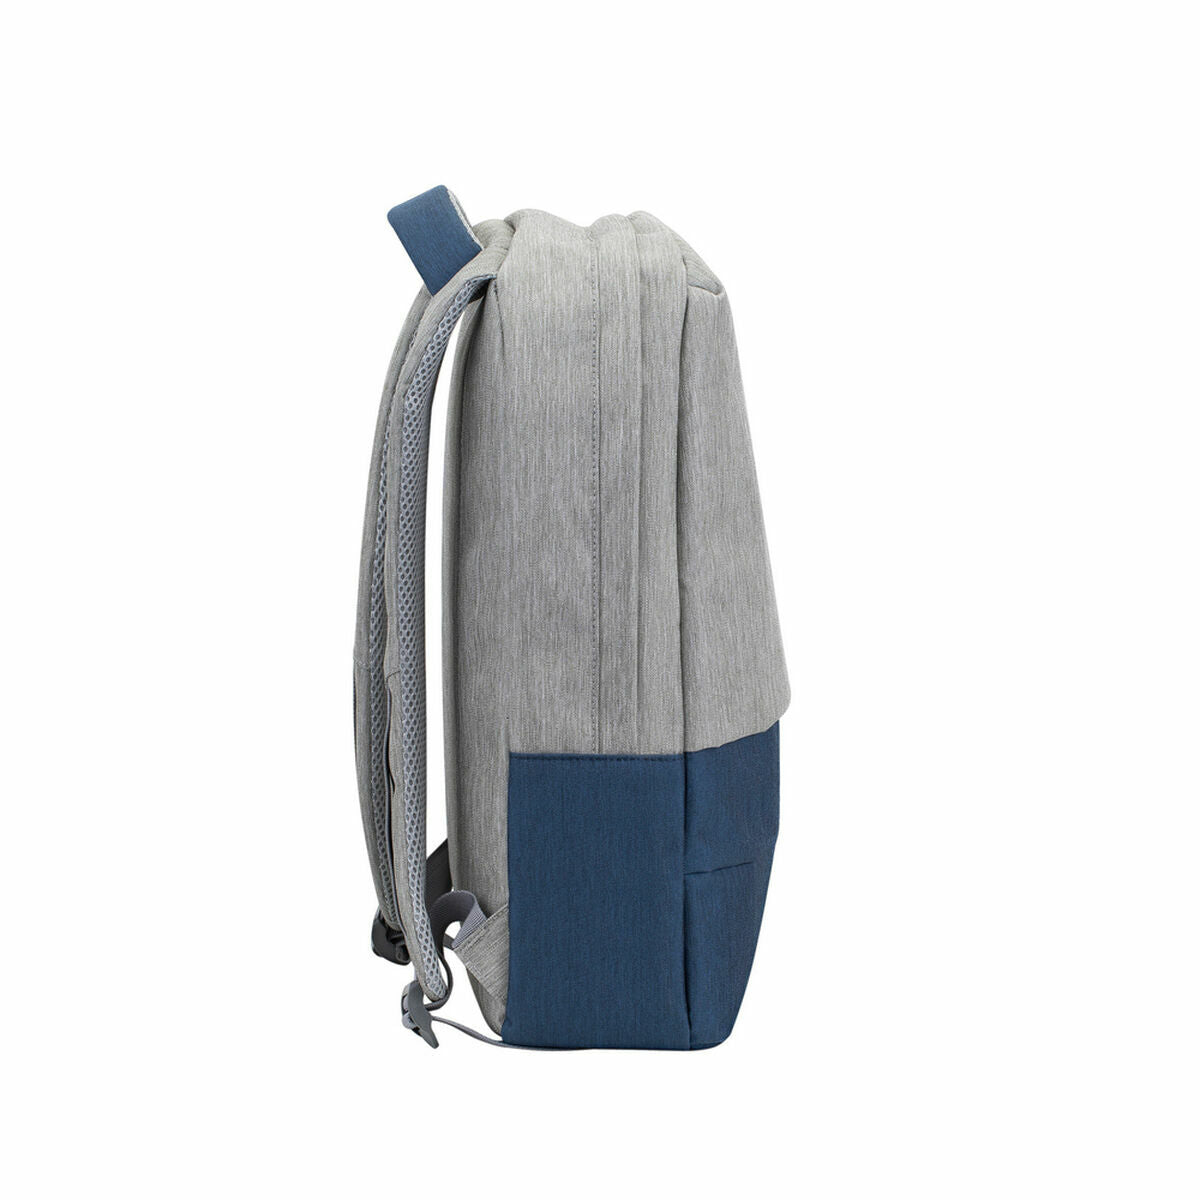 Laptop Backpack Rivacase Prater 15,6"